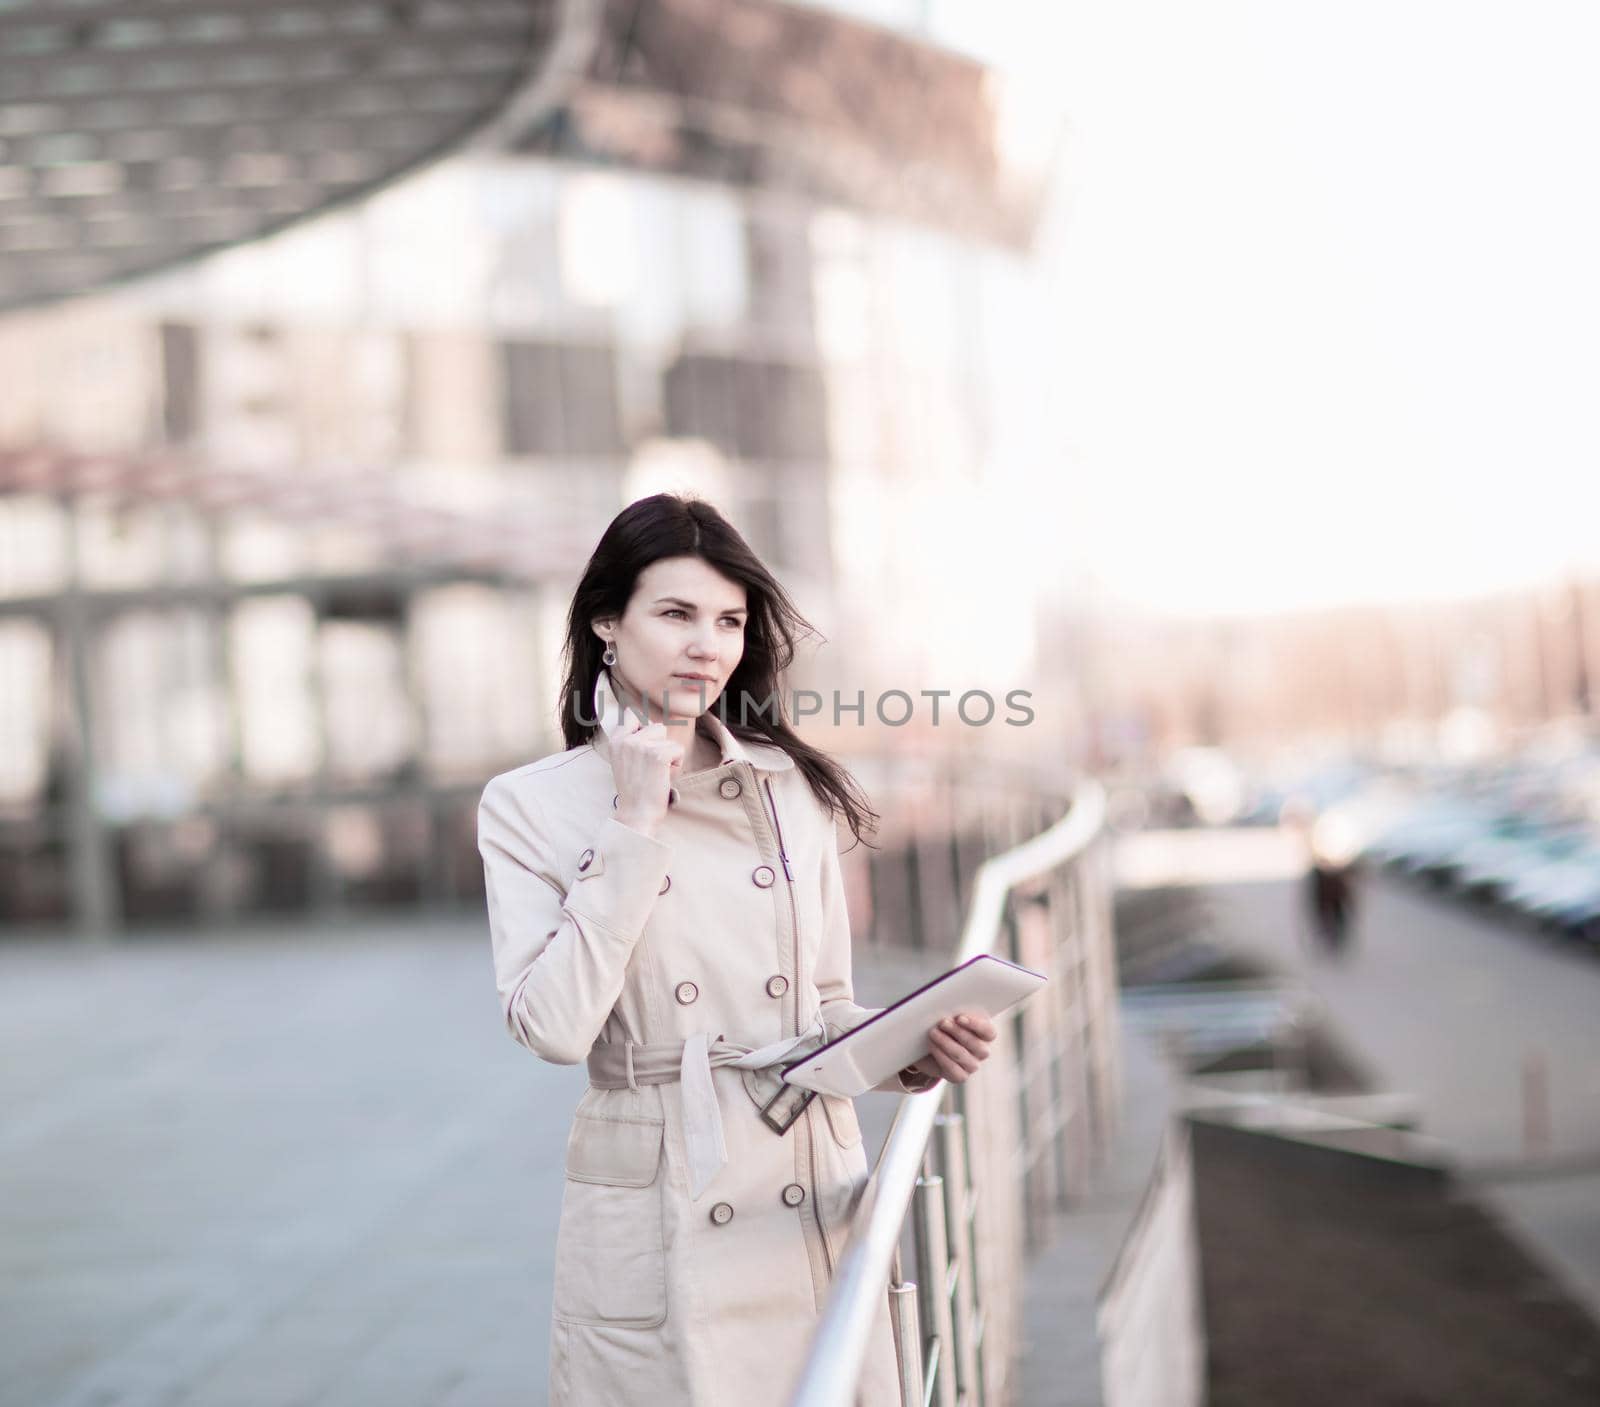 Confident business woman working on a digital tablet, standing next to an office building. The photo has an empty space for your text